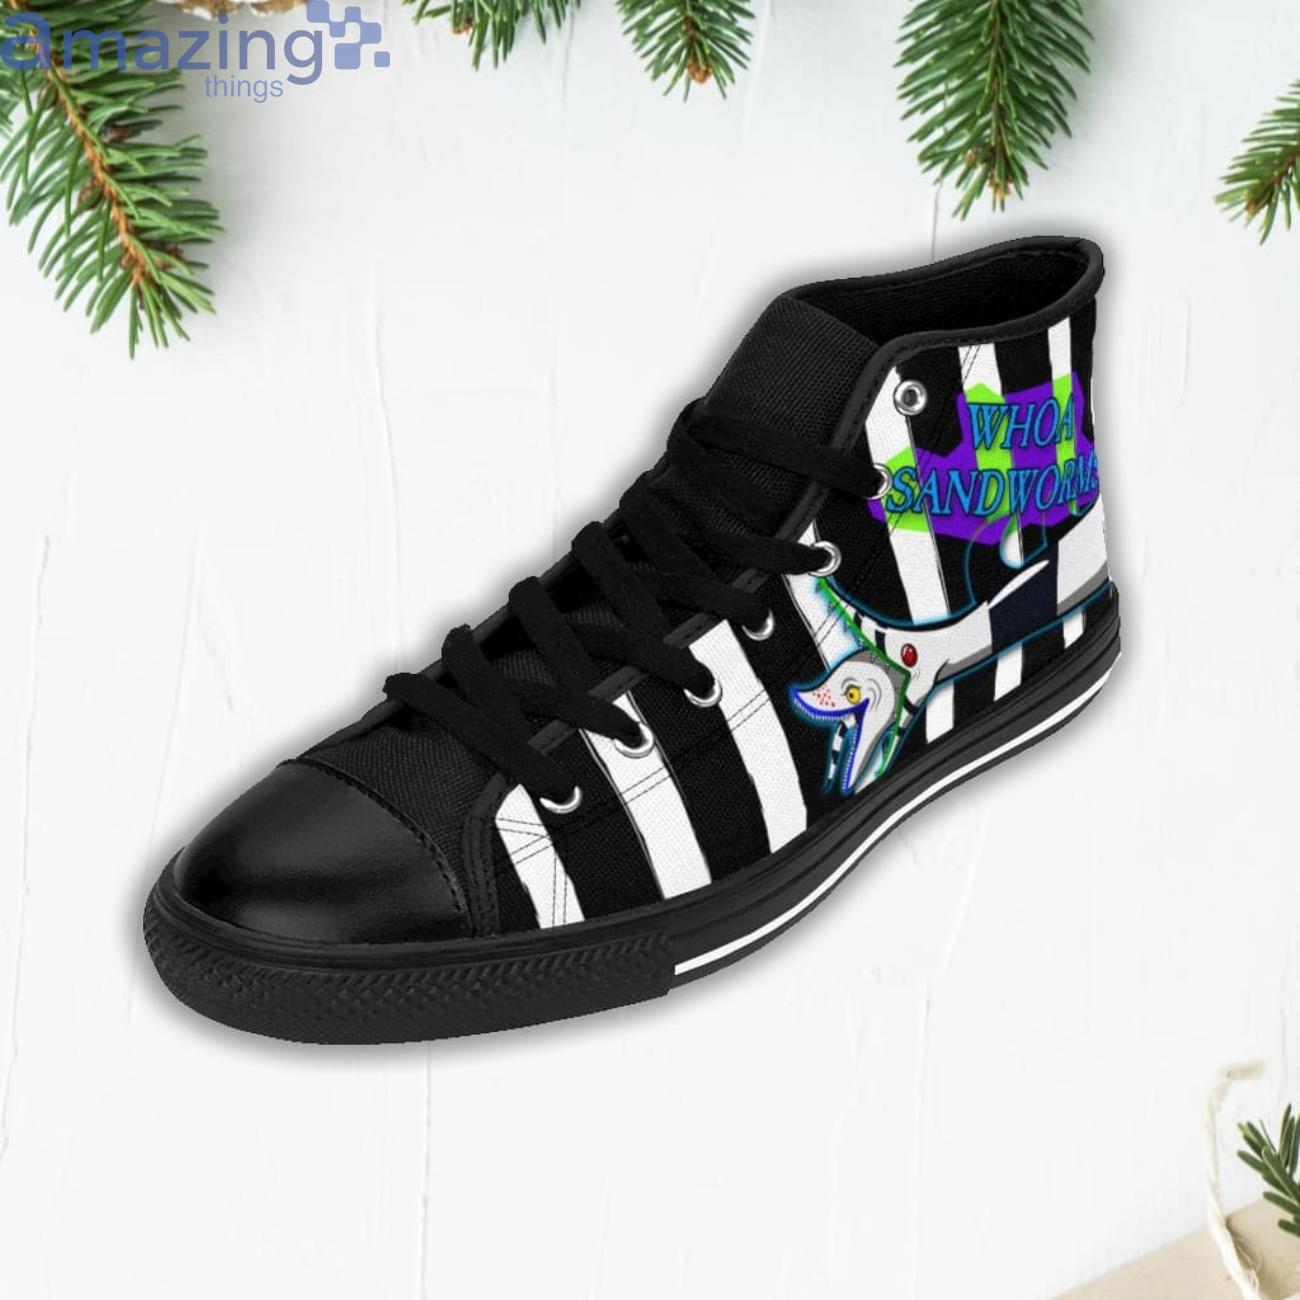 Whoa Sandworms Beetlejuice High Top Shoes Product Photo 5